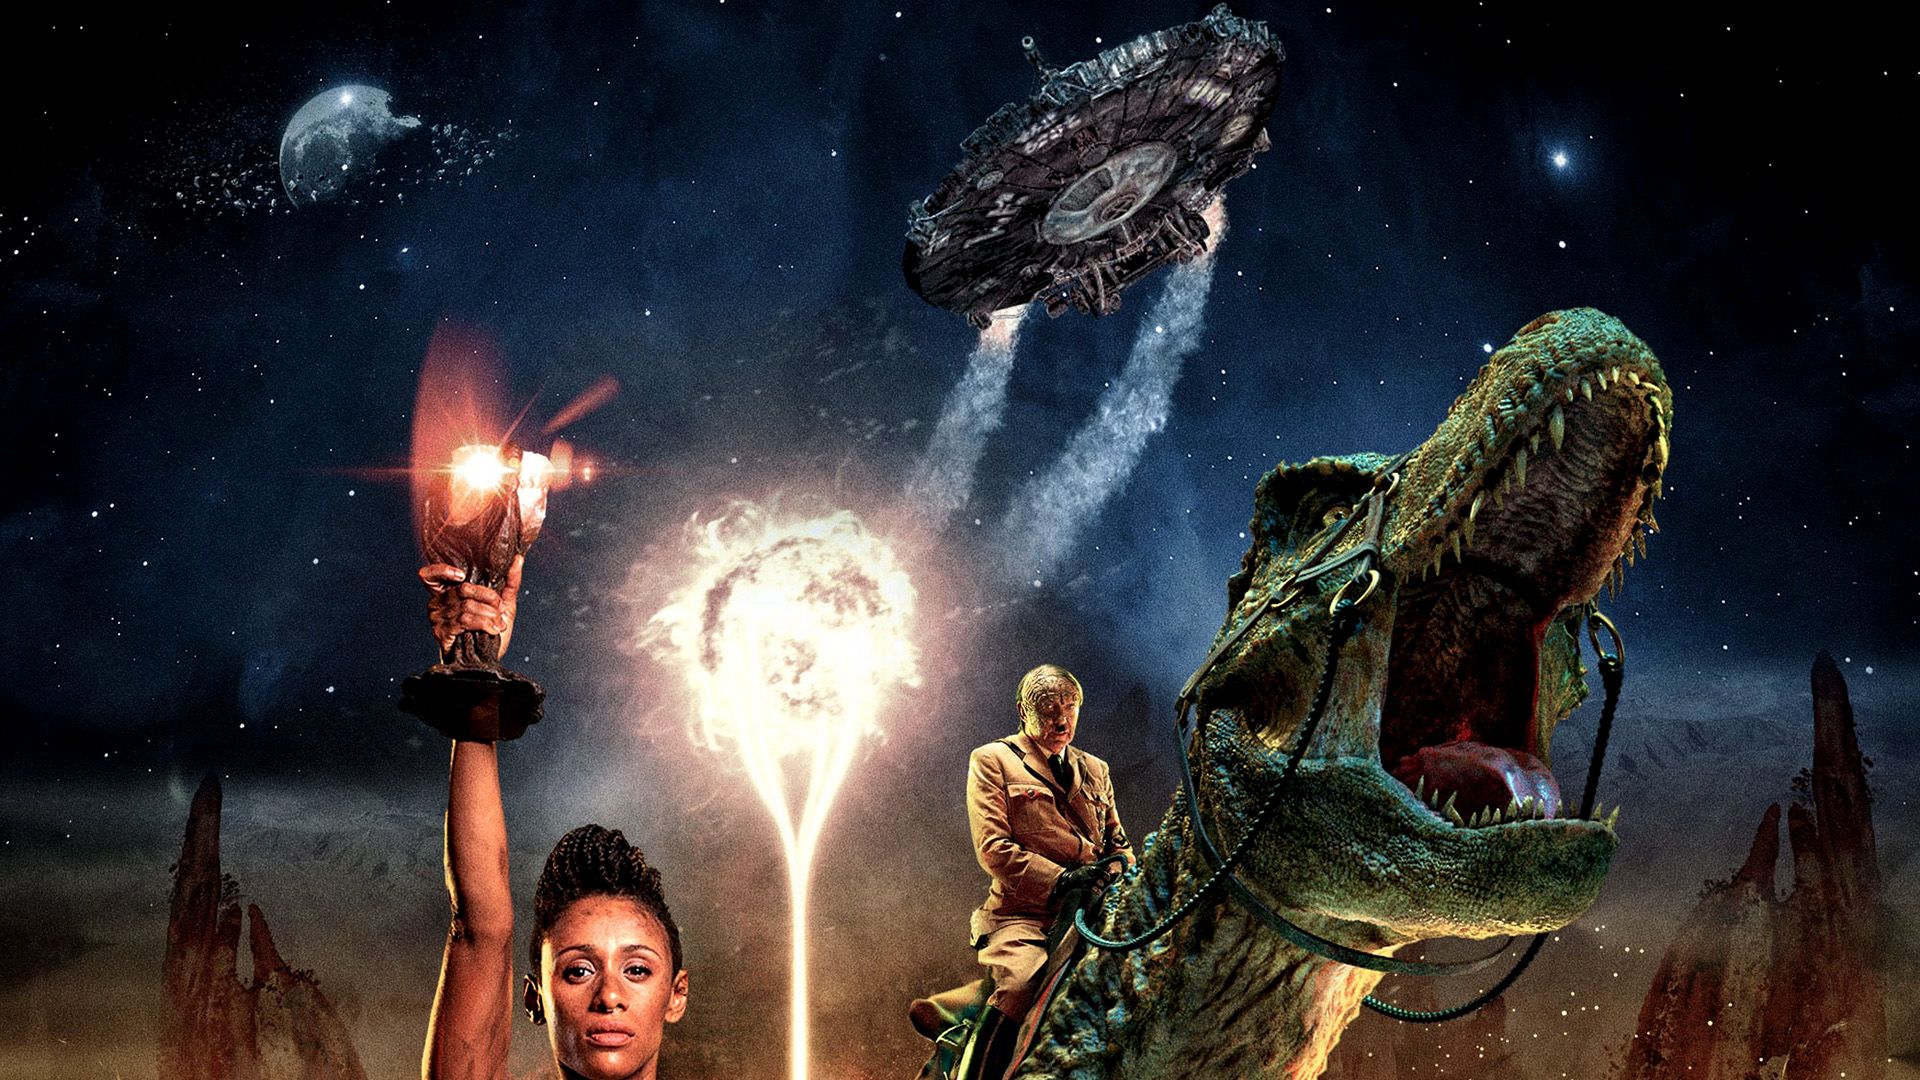 Iron Sky: The Coming Race background